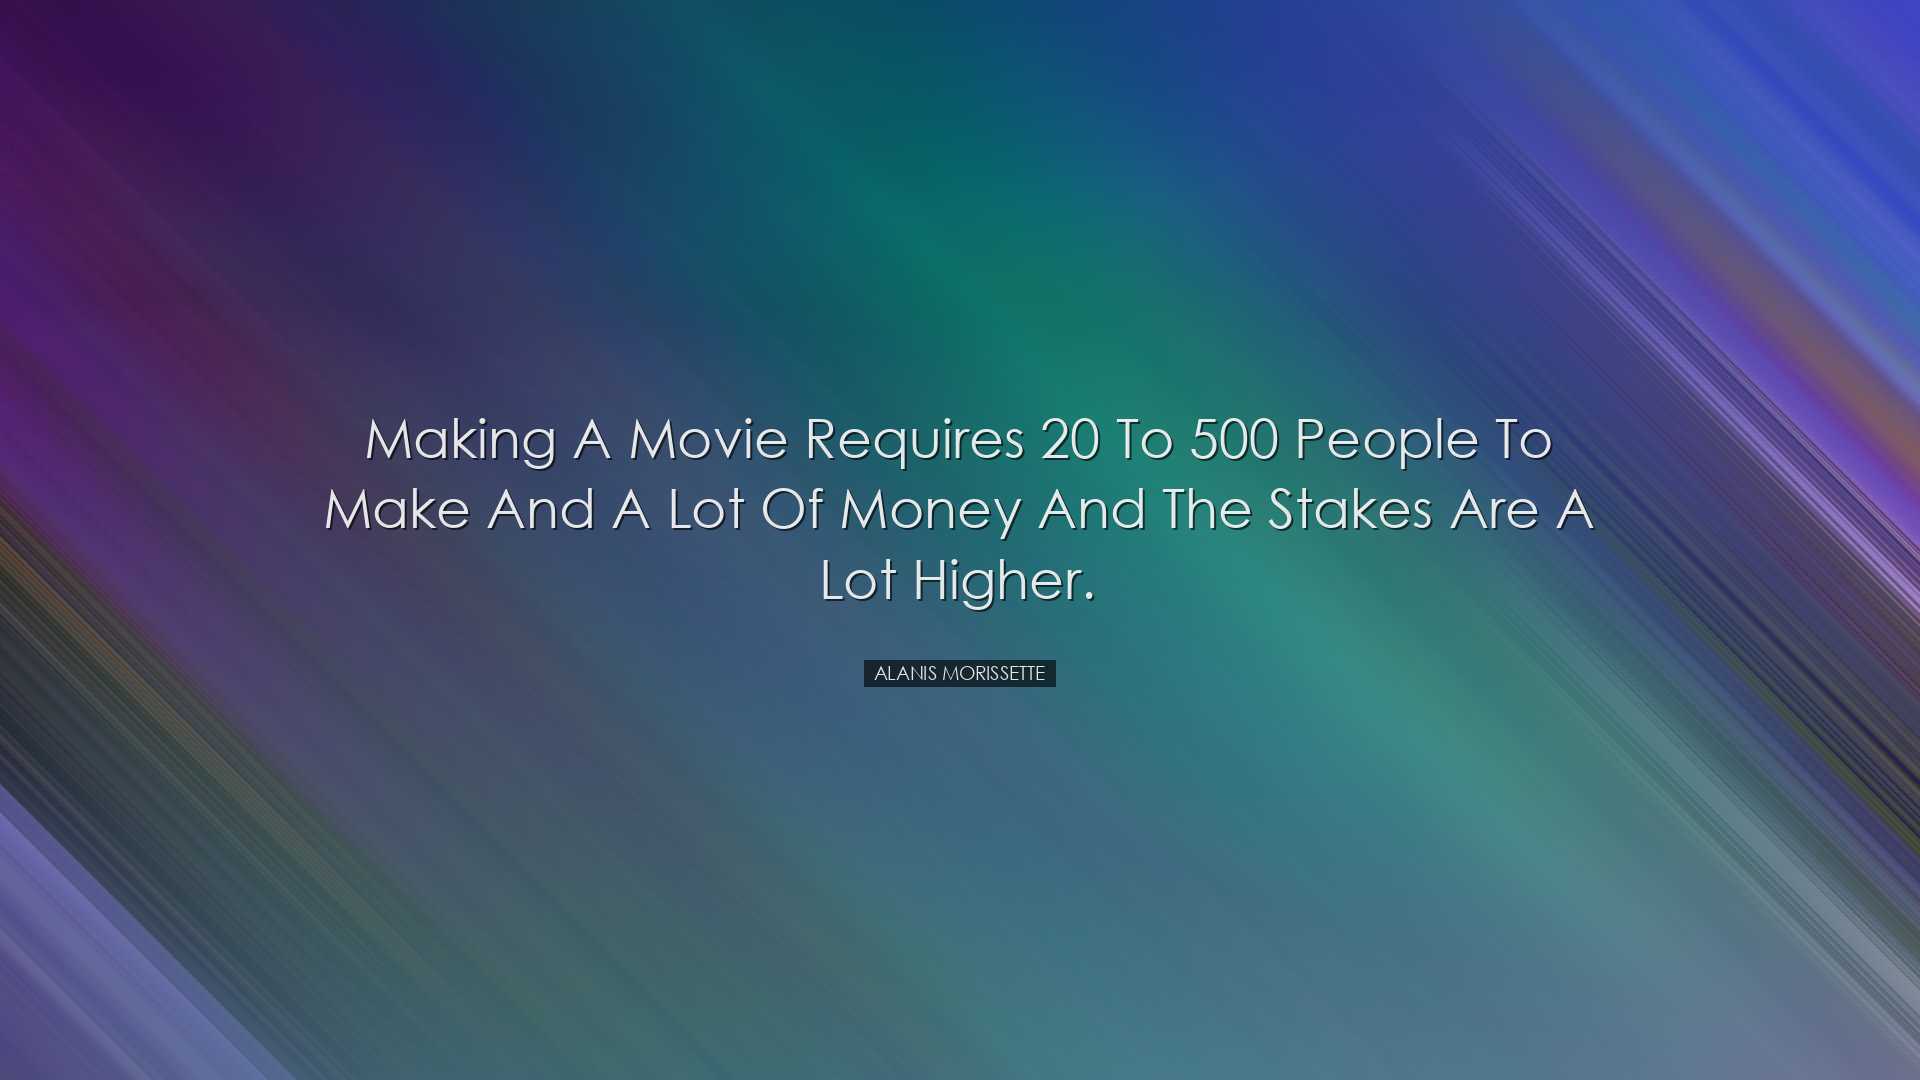 Making a movie requires 20 to 500 people to make and a lot of mone